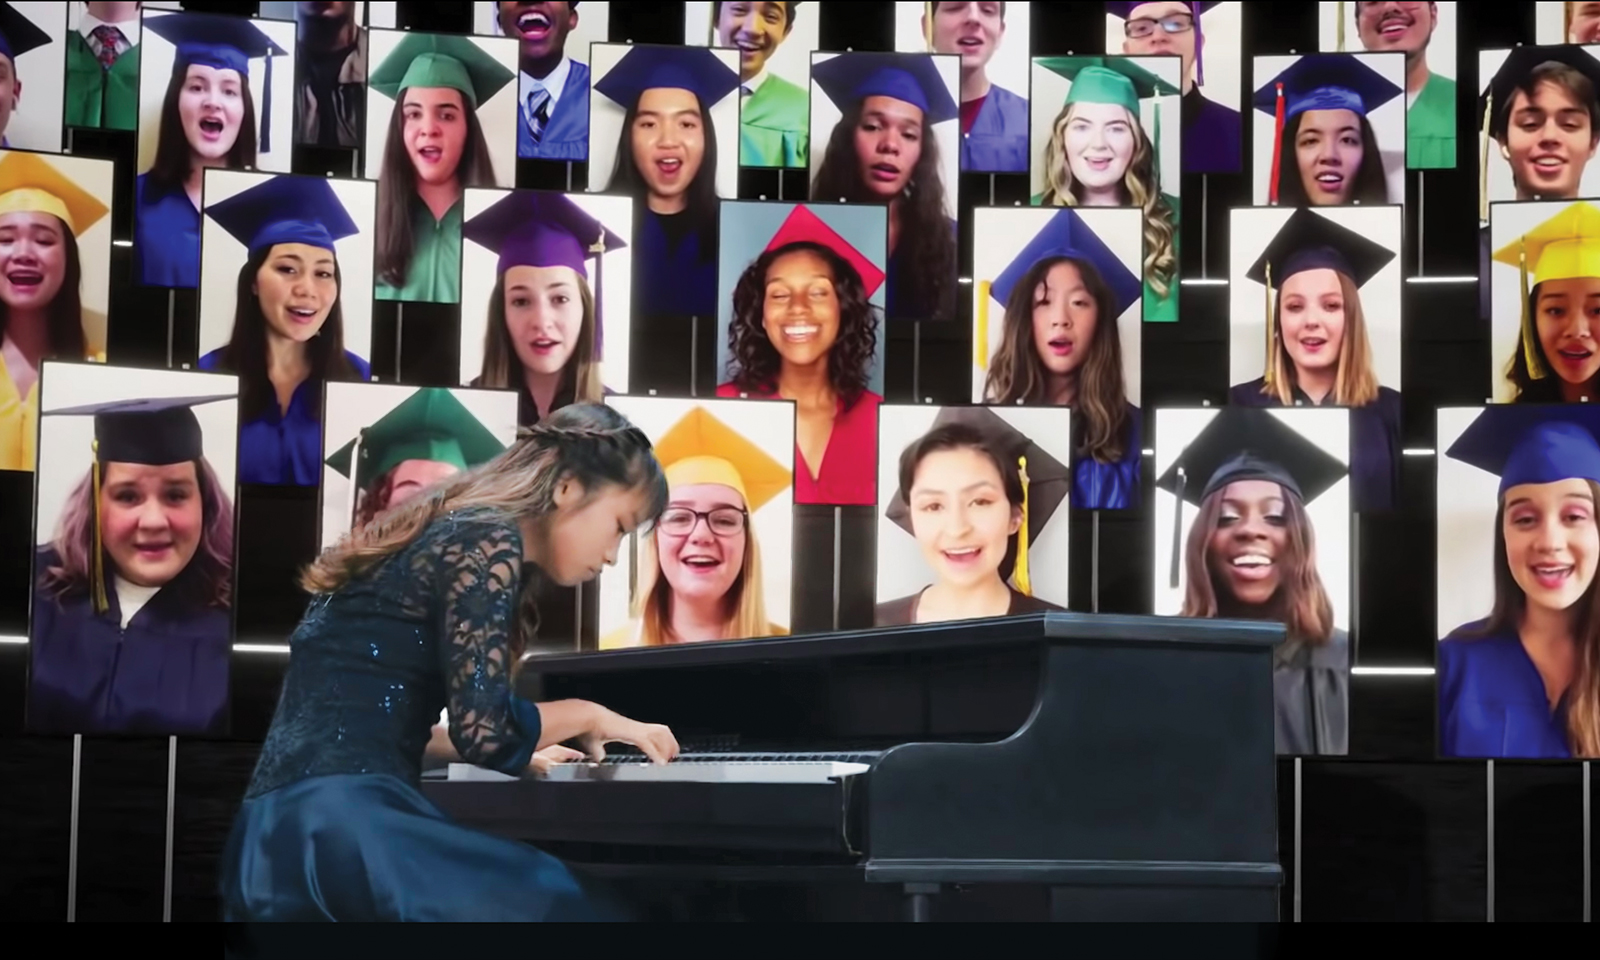 Northwood pianist leads national anthem for America’s graduation broadcast